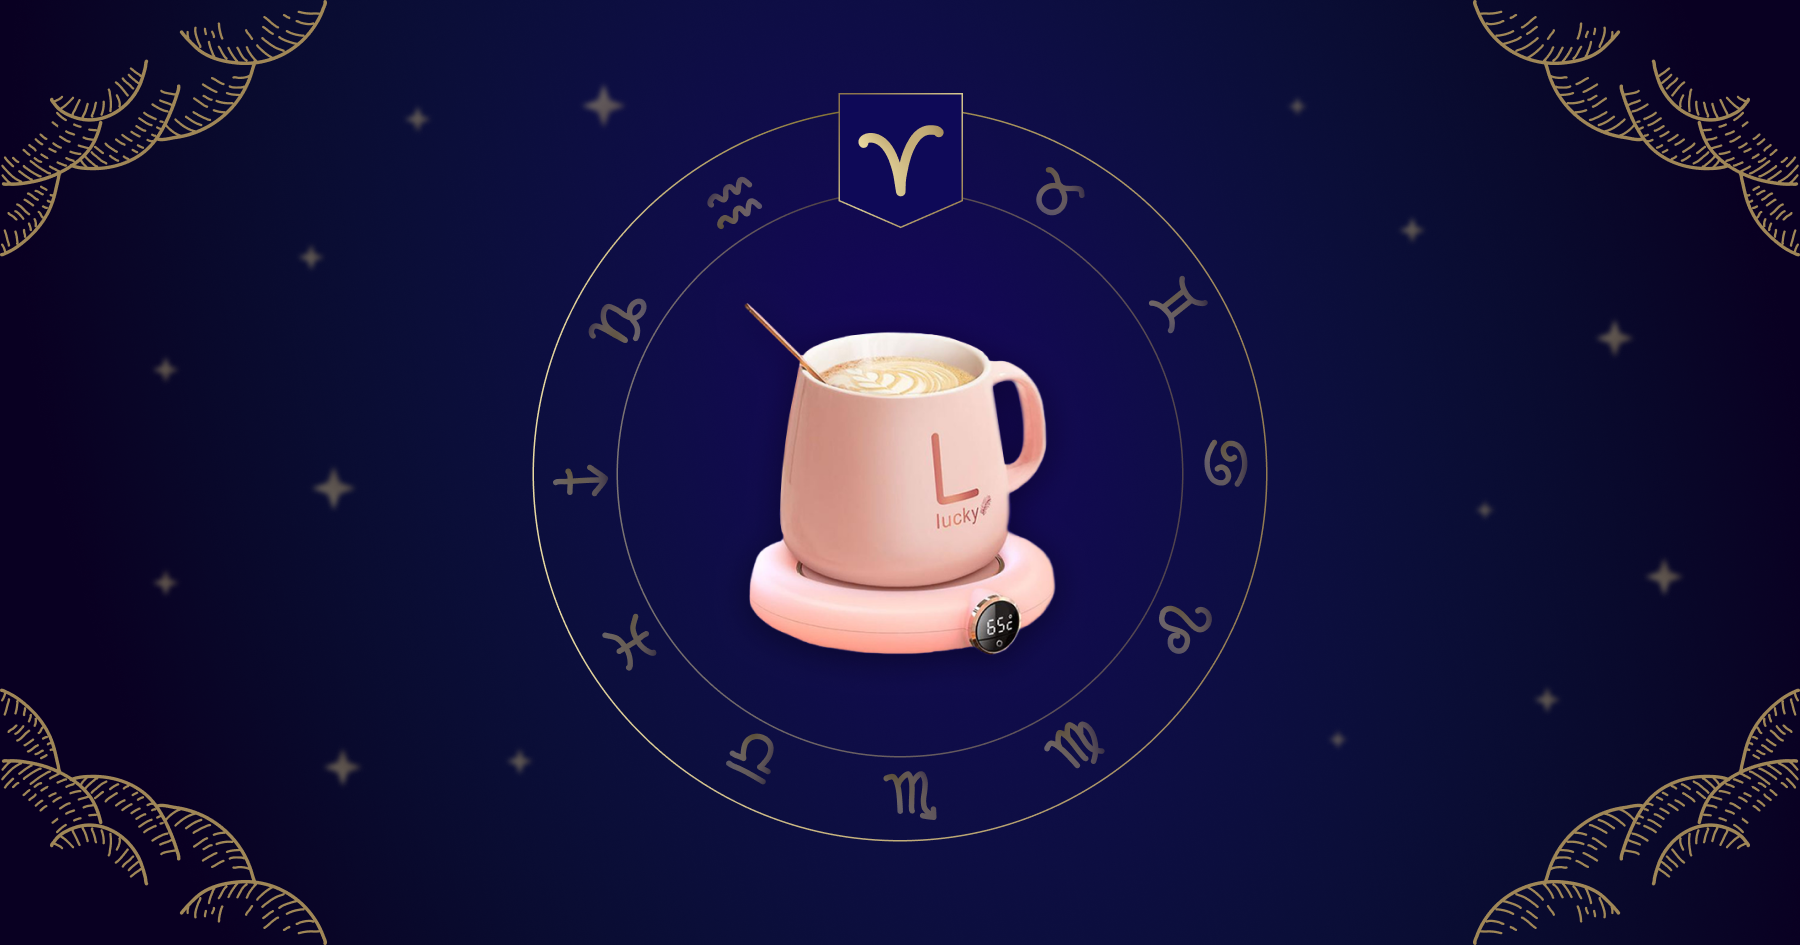 https://blog.wish.com/hs-fs/hubfs/Astrology%20gift%20guide/Blog_SubBanner_AstrologicalGiftGuide_2021_Aries-1.png?width=1800&name=Blog_SubBanner_AstrologicalGiftGuide_2021_Aries-1.png